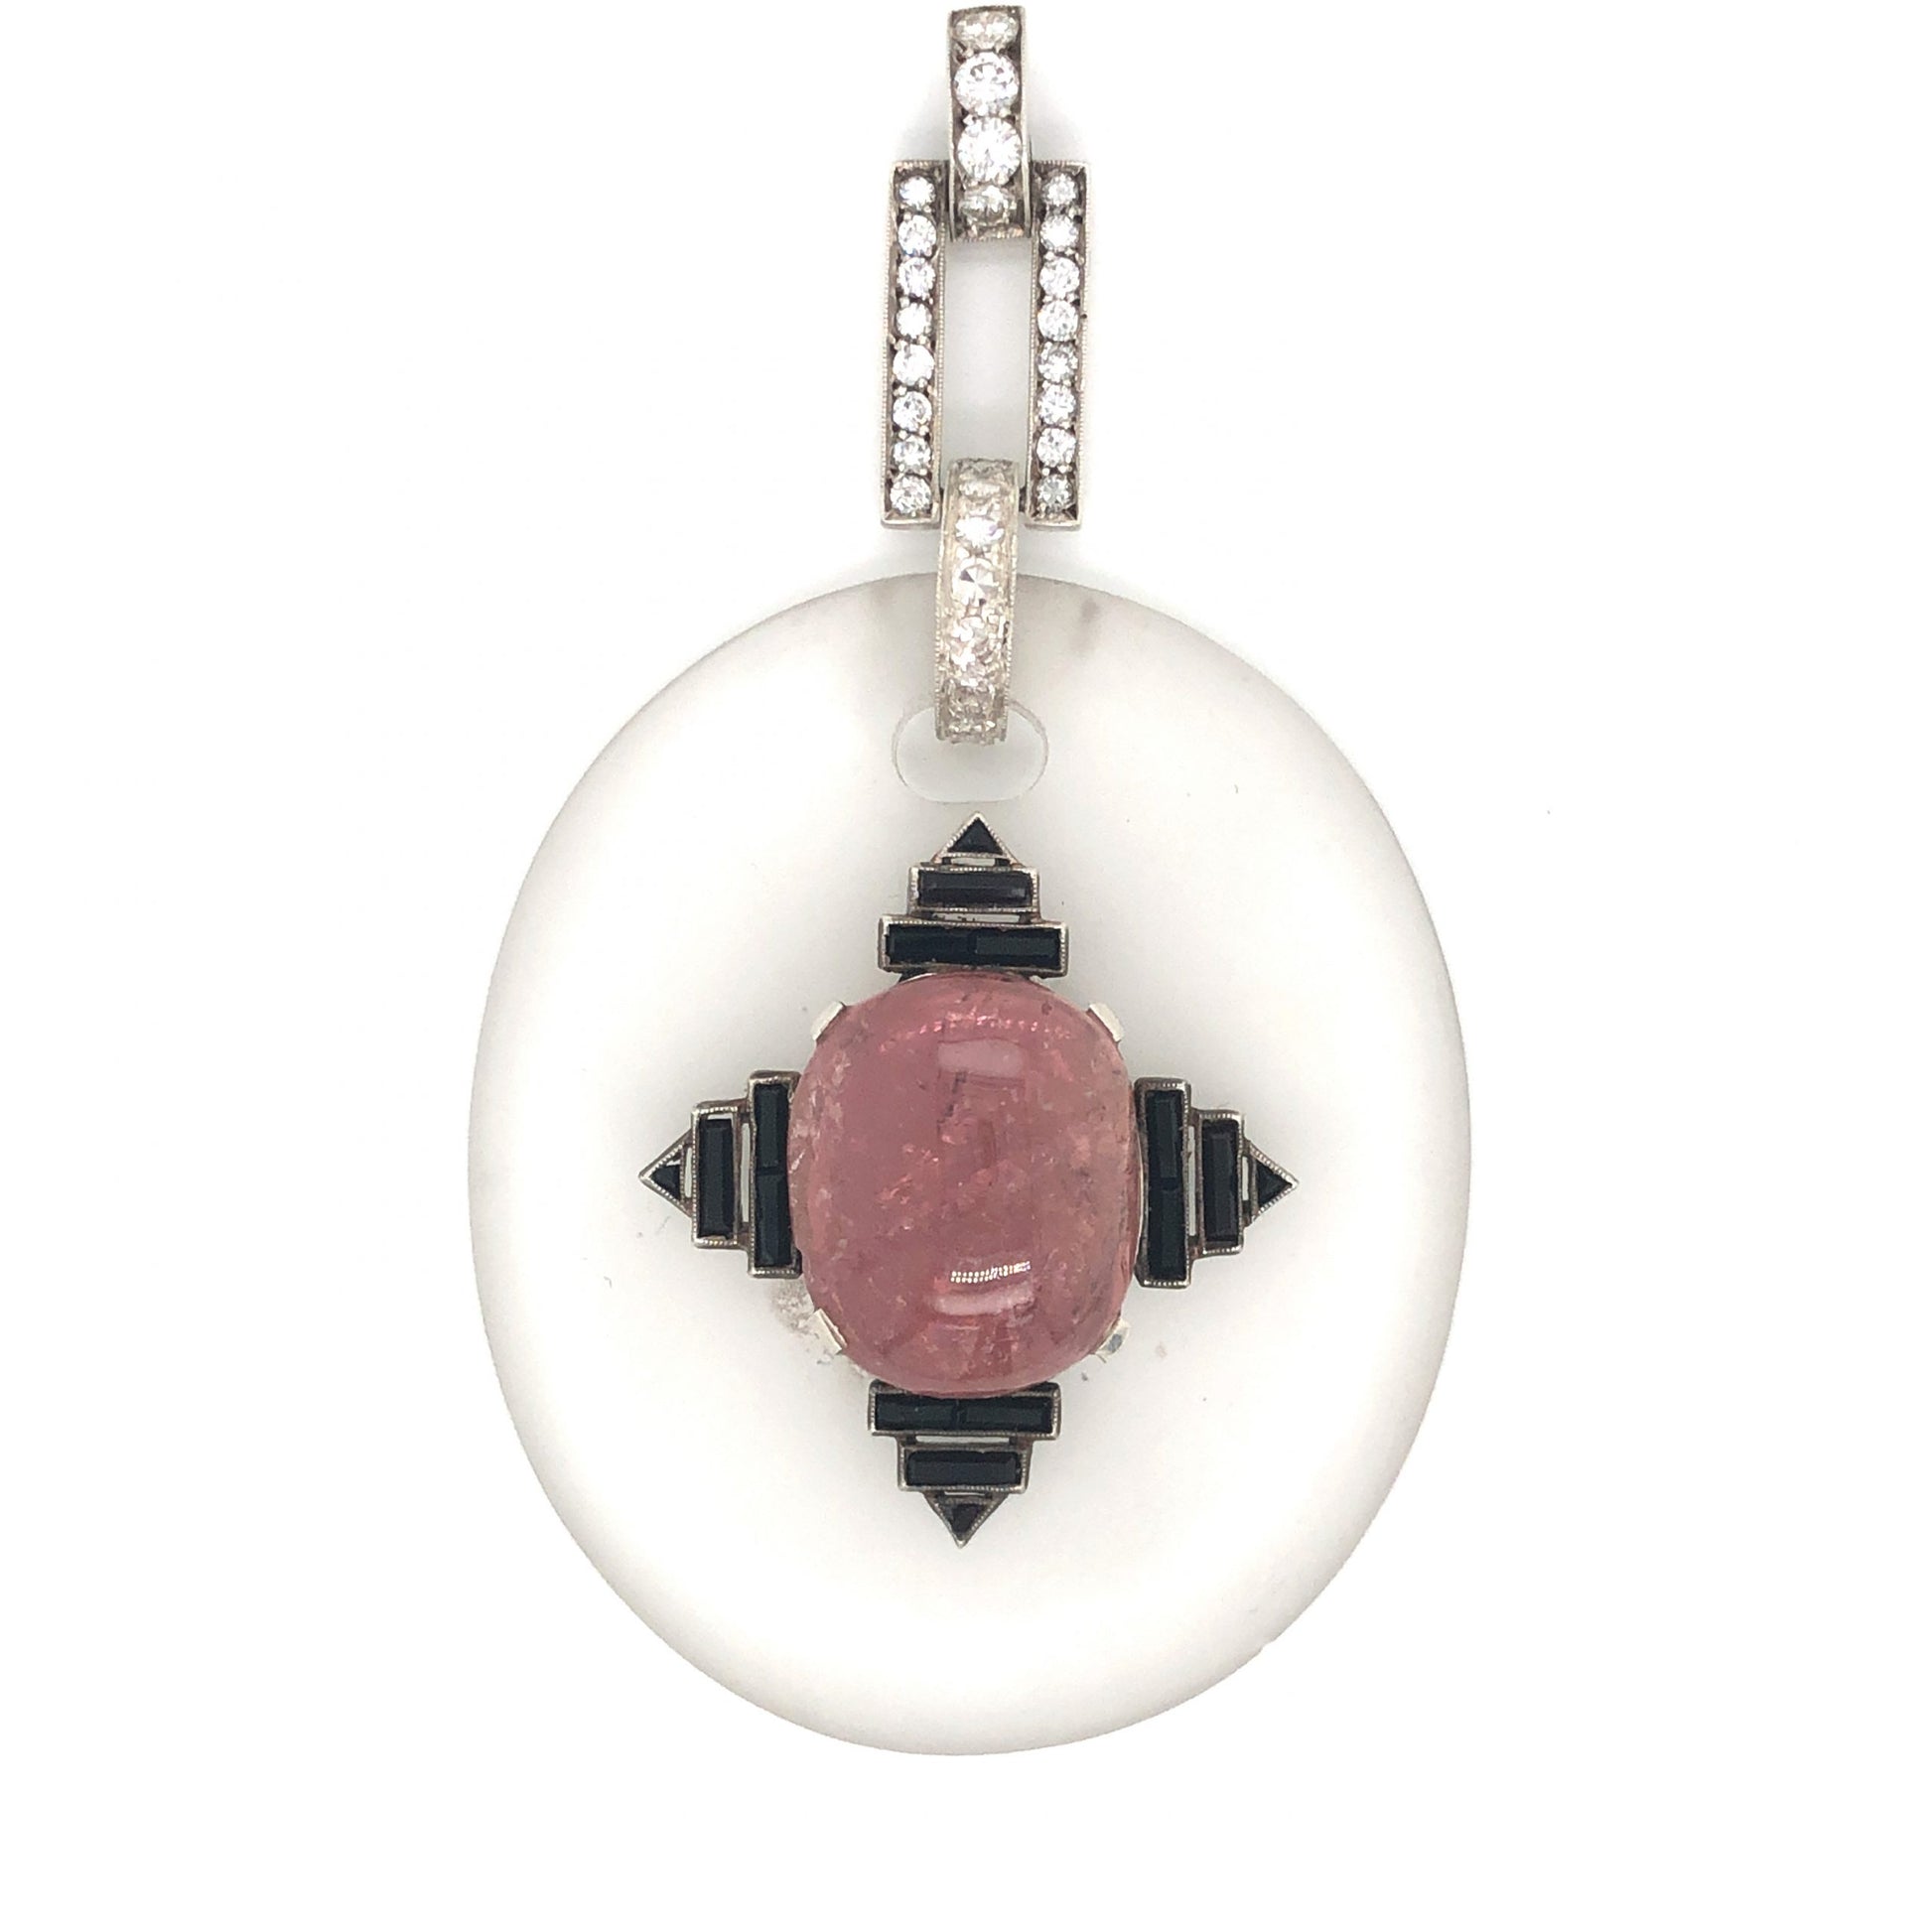 Pink Tourmaline Pendant w/ Diamonds in Sterling SilverComposition: Sterling SilverTotal Diamond Weight: 1.04 ctTotal Gram Weight: 25.3 gInscription: German Sterling